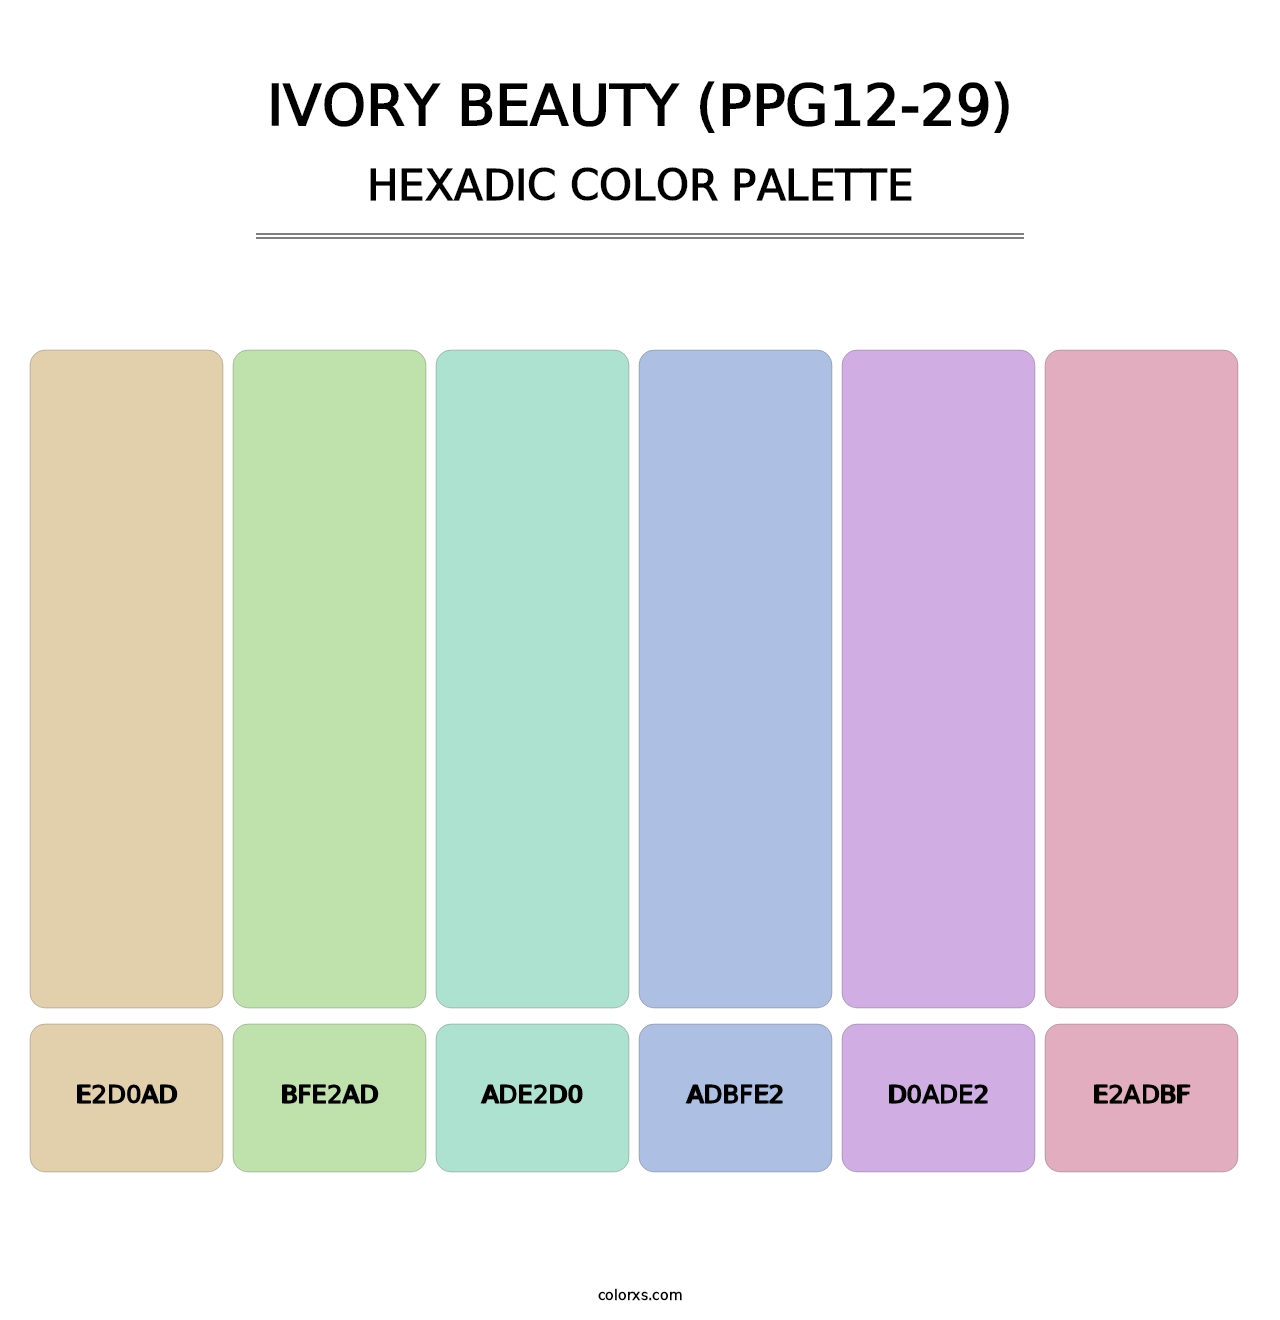 Ivory Beauty (PPG12-29) - Hexadic Color Palette